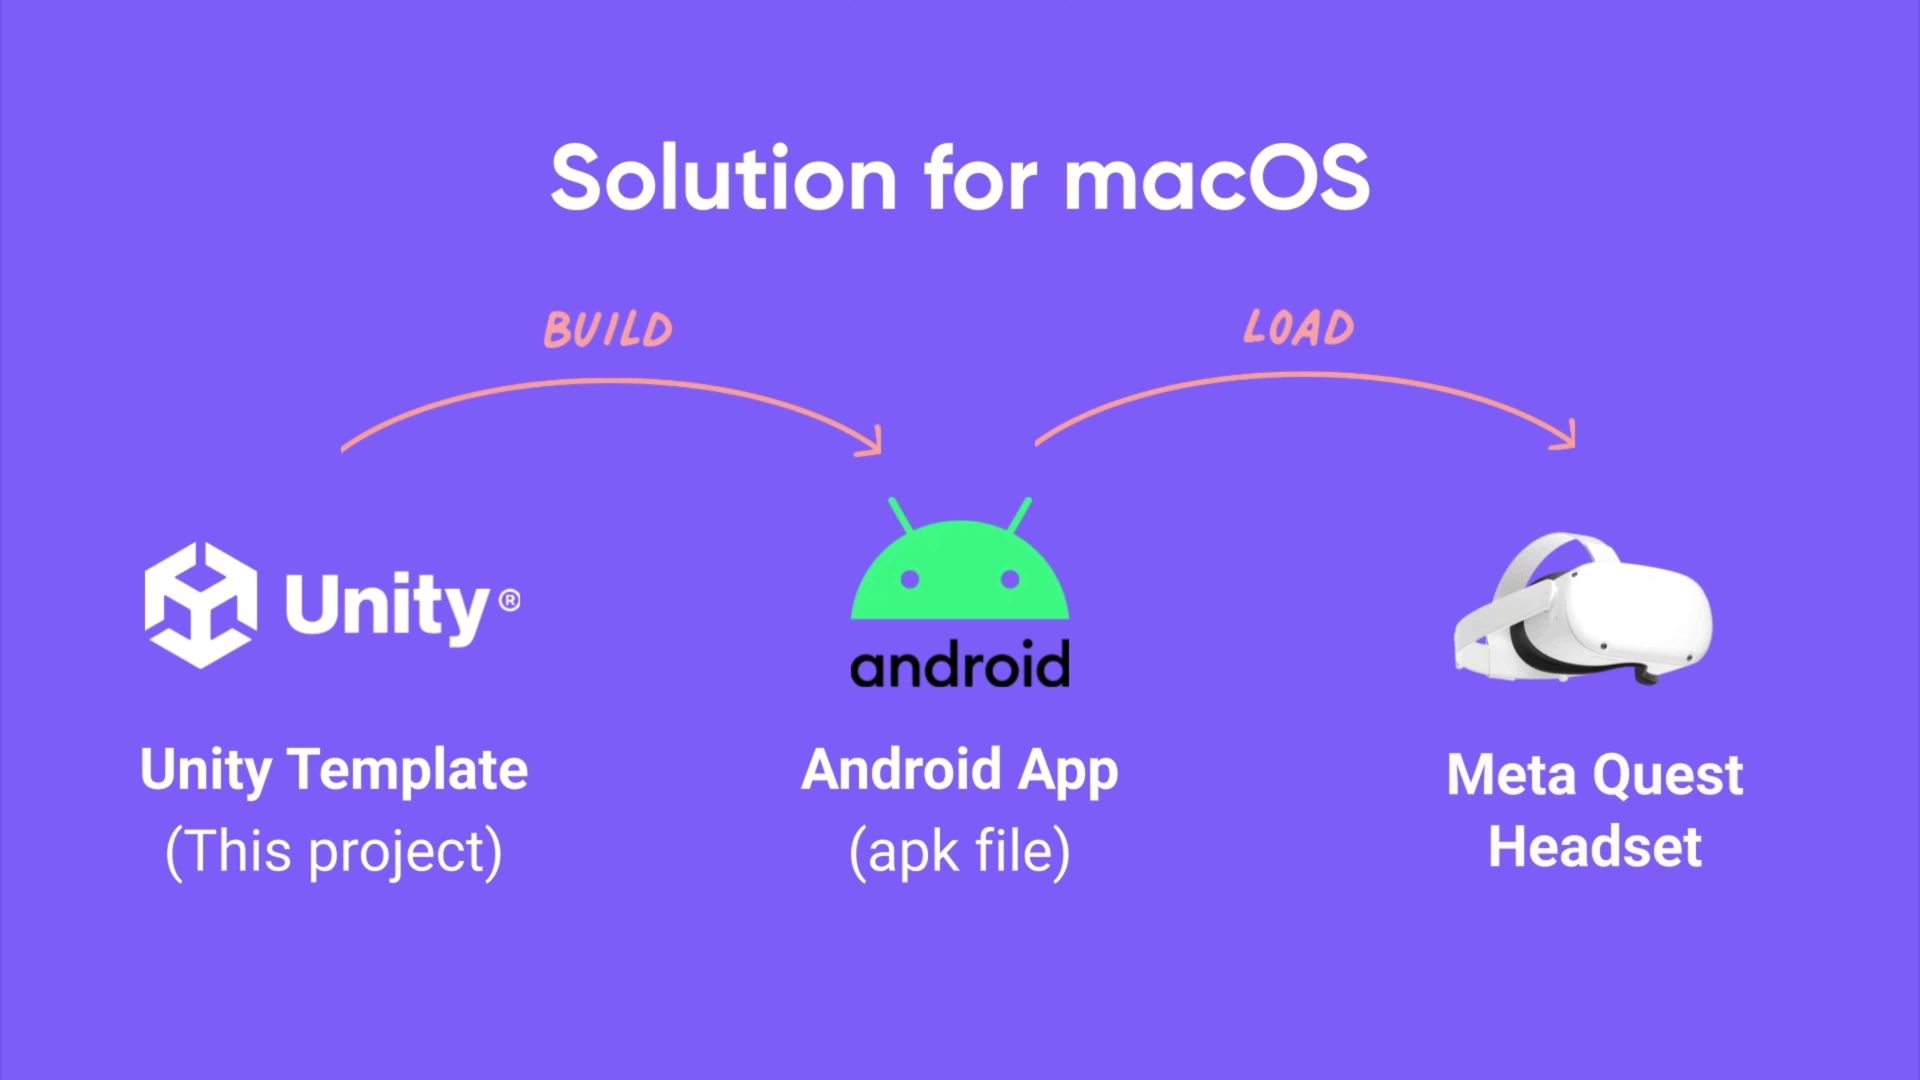 Solution for macOS